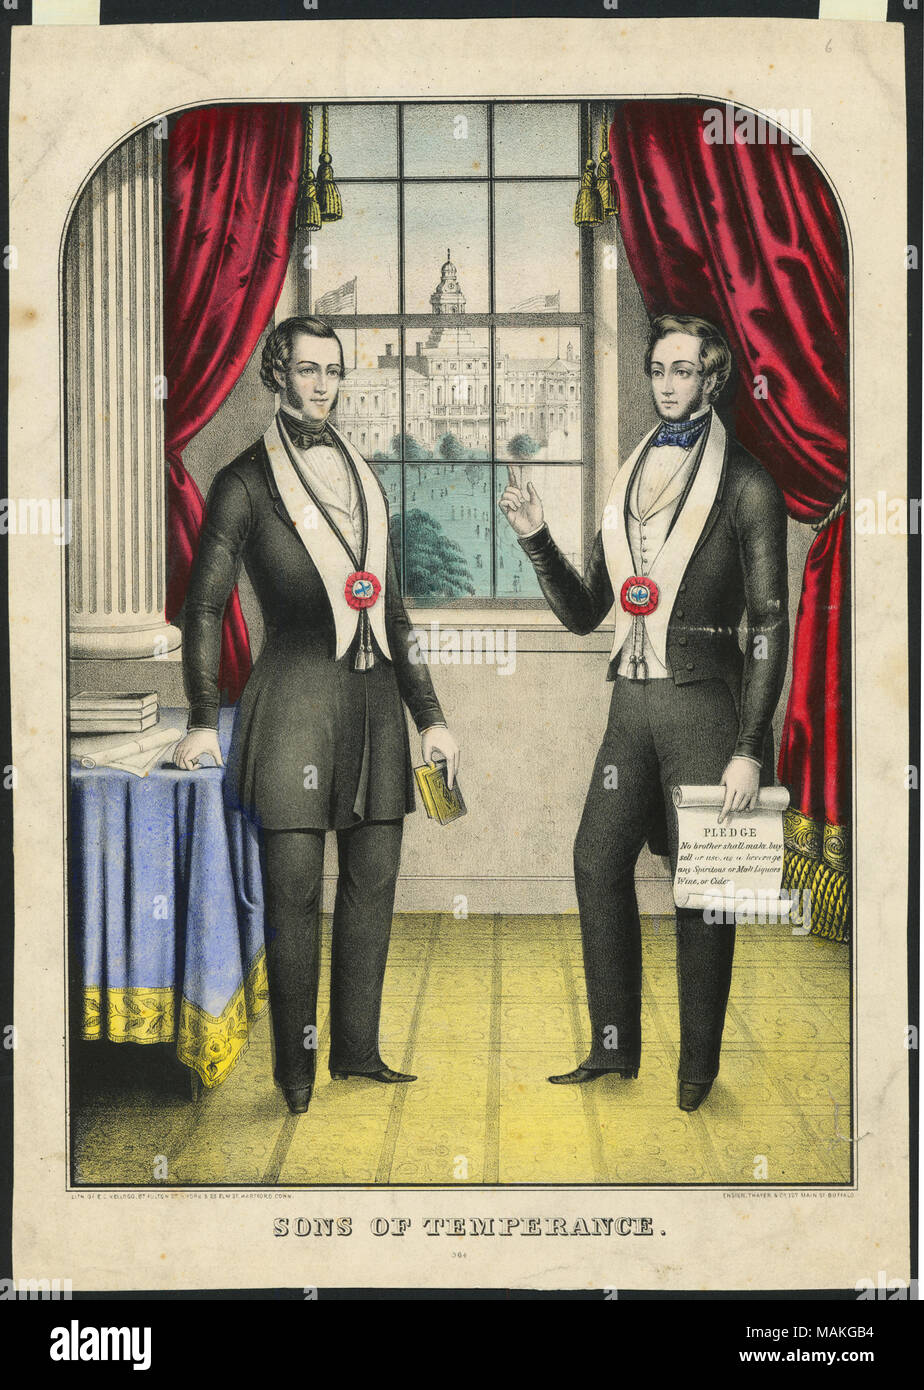 Vertical hand-colored lithograph showing two men in suits with stoles and cords standing in a room. One holds a pledge which reads: 'No brother shall make, buy, sell or use, as a beverage any Spiritous or Malt Liquors Wine, or Cider.' Title: 'Sons of Temperance.'  . circa 1845. E. C. Kellogg Stock Photo